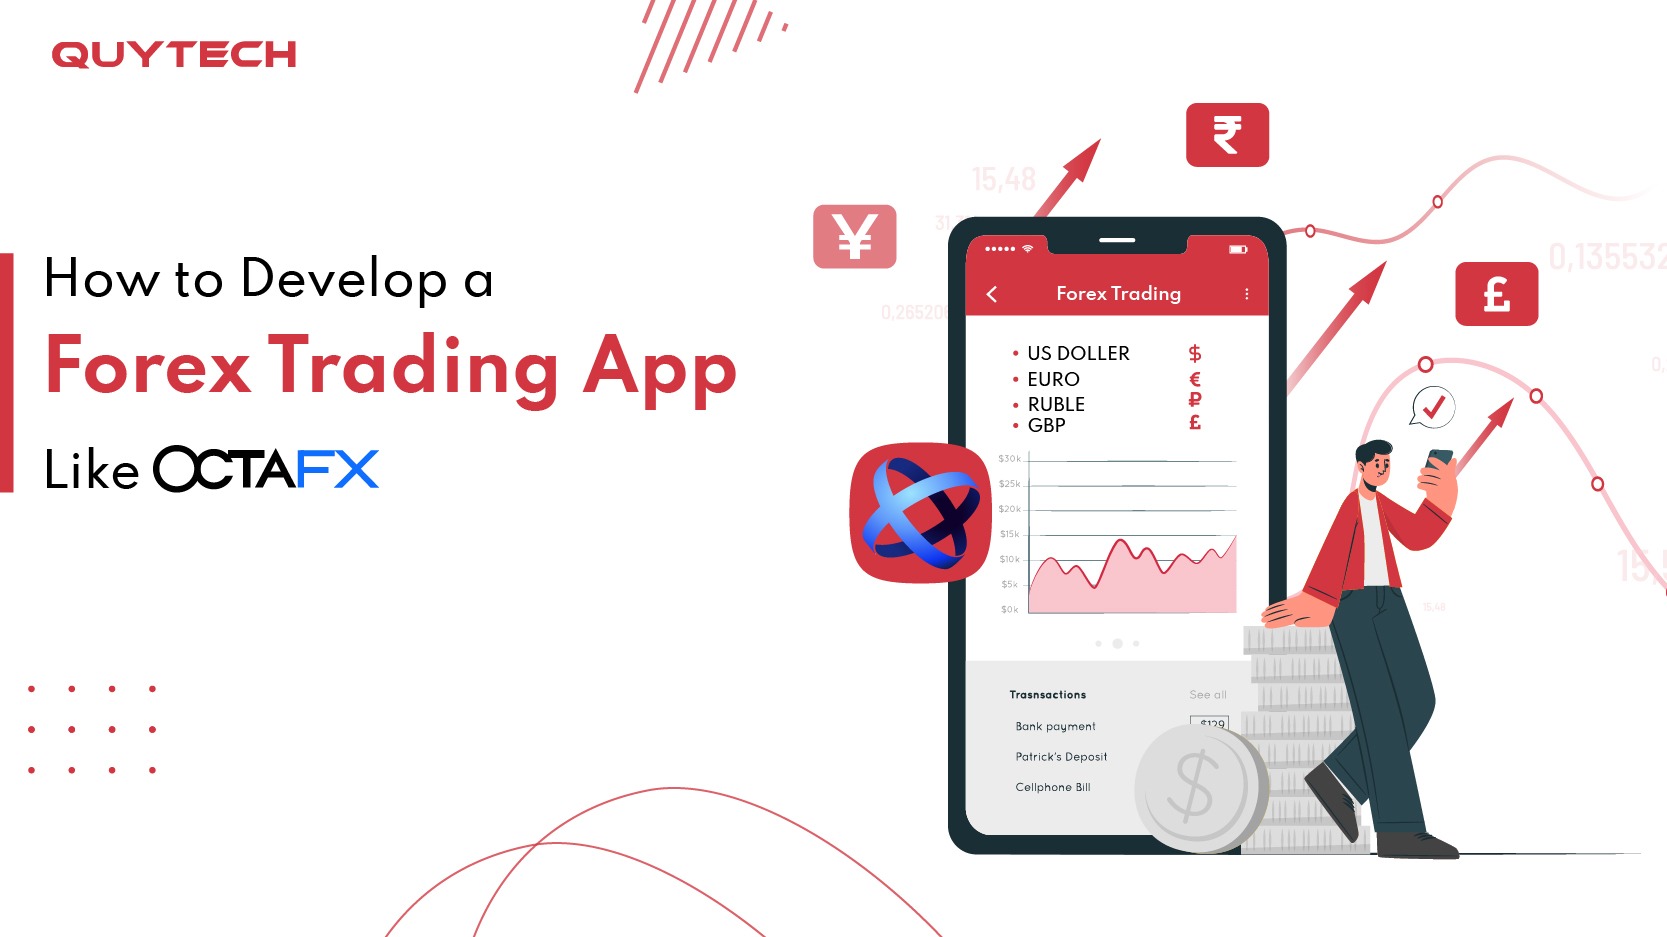 How to Develop a Forex Trading App Like OctaFX